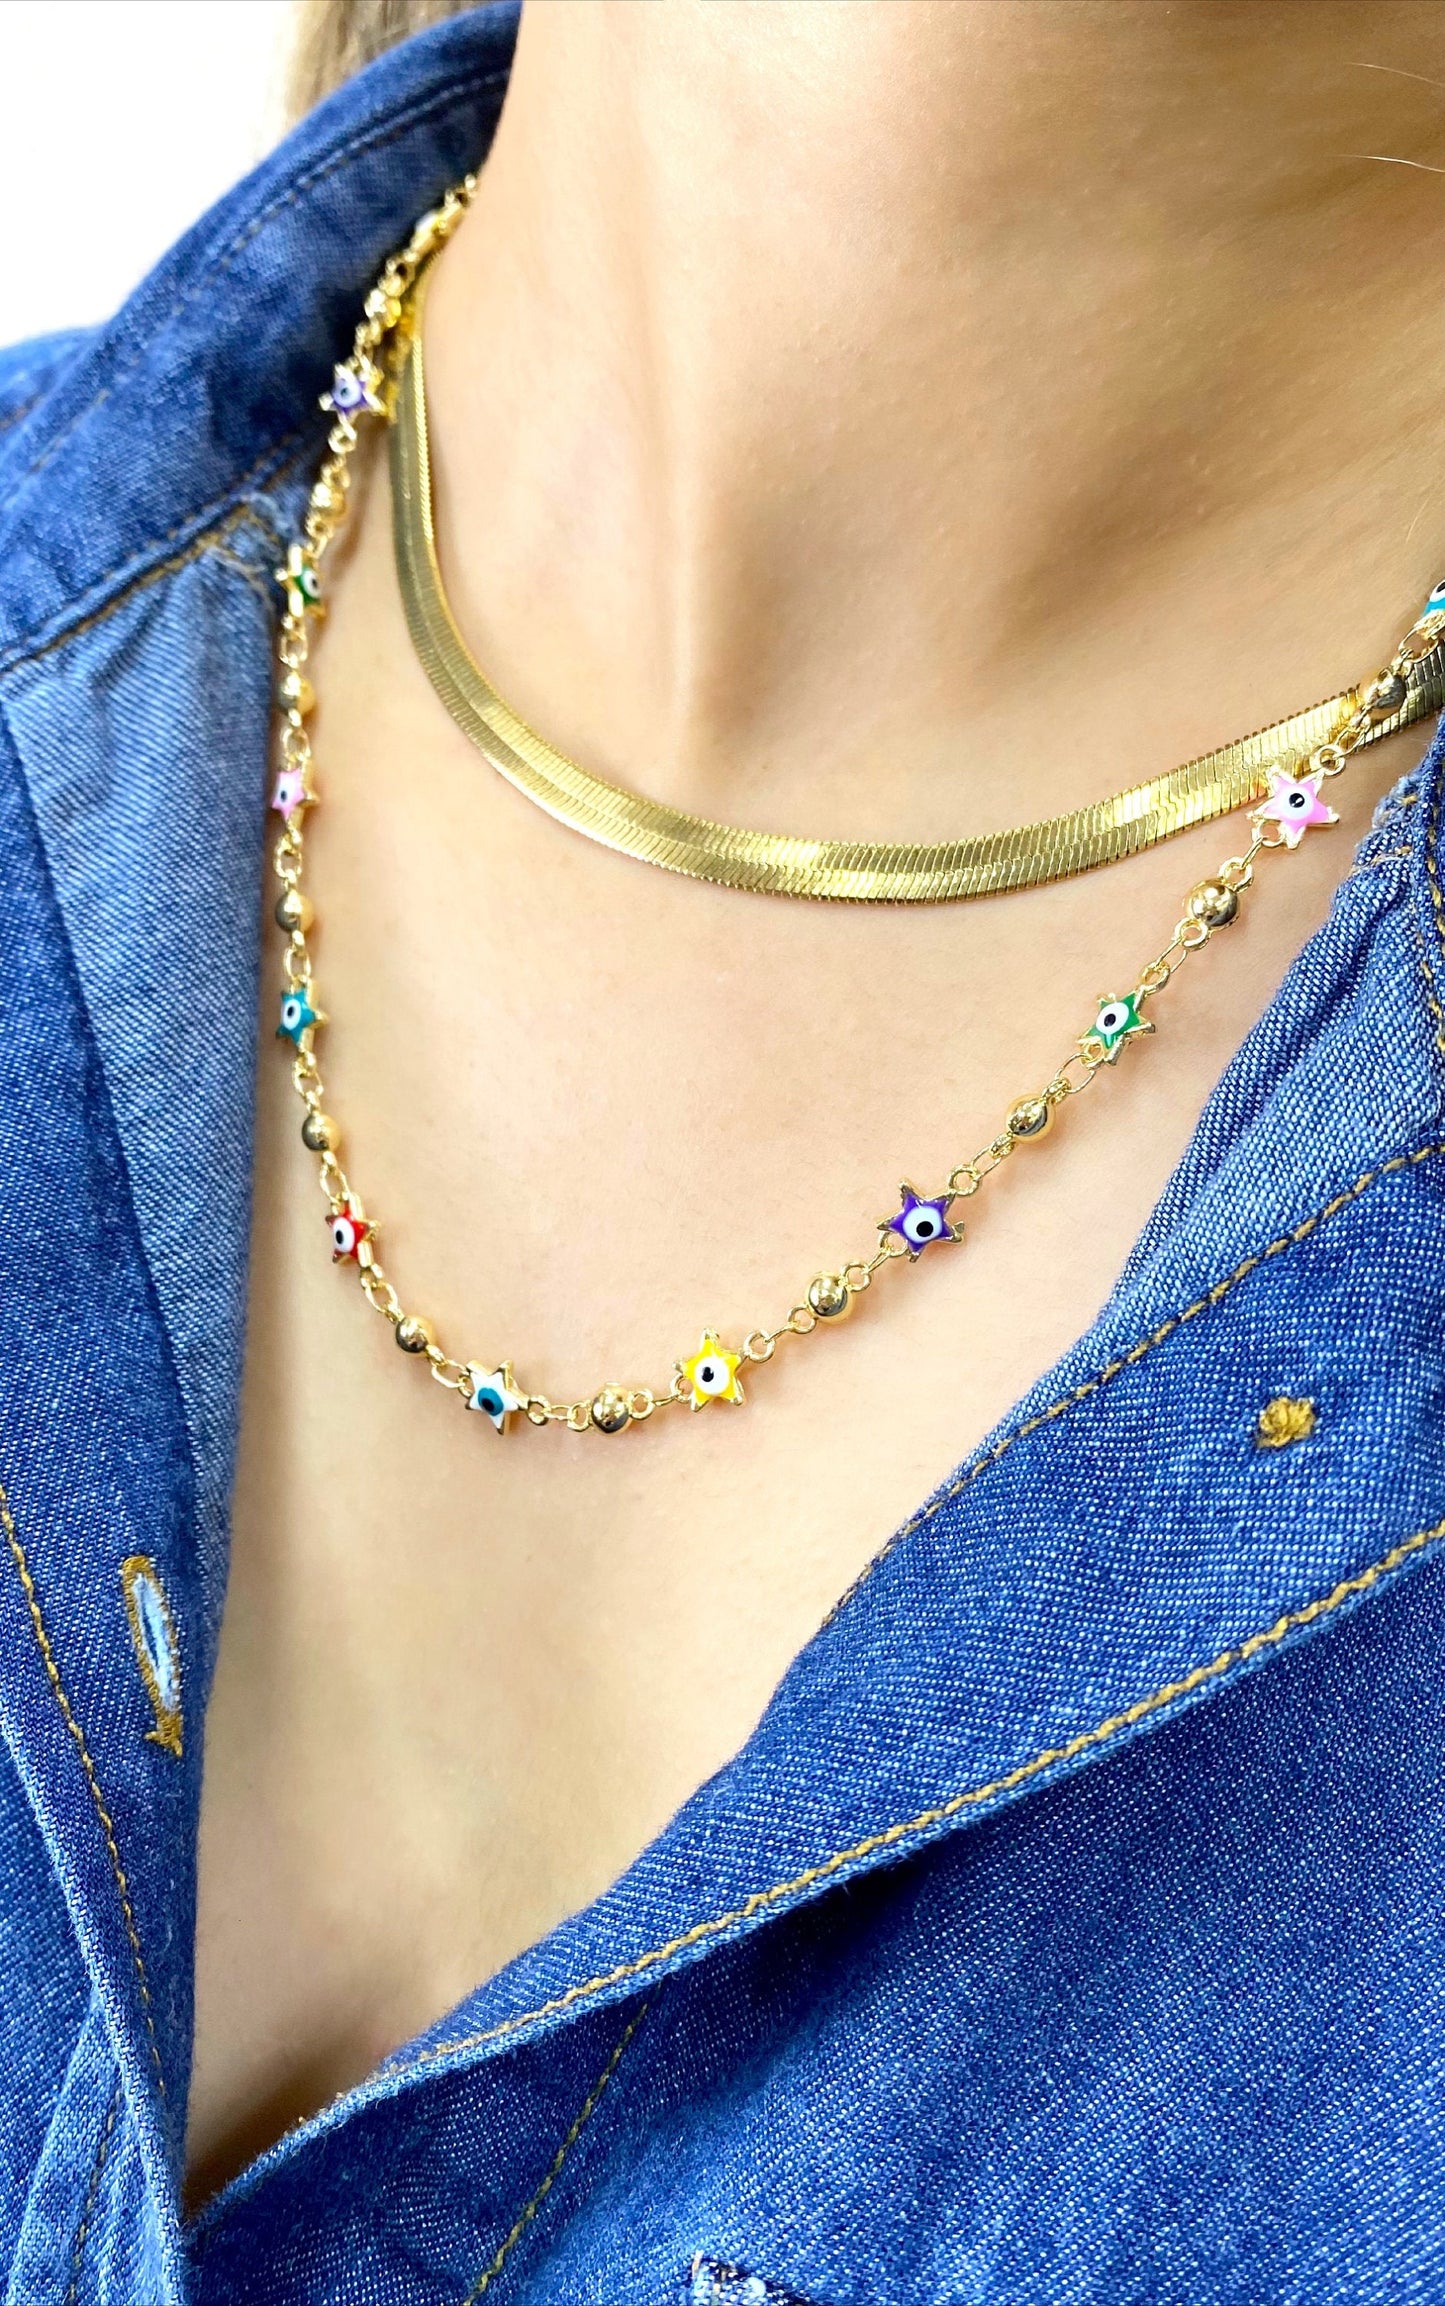 18k Gold Filled Bead Link Chain Featuring Colorful Enamel Evil Eyes Stars Necklace Wholesale Jewelry Supplies